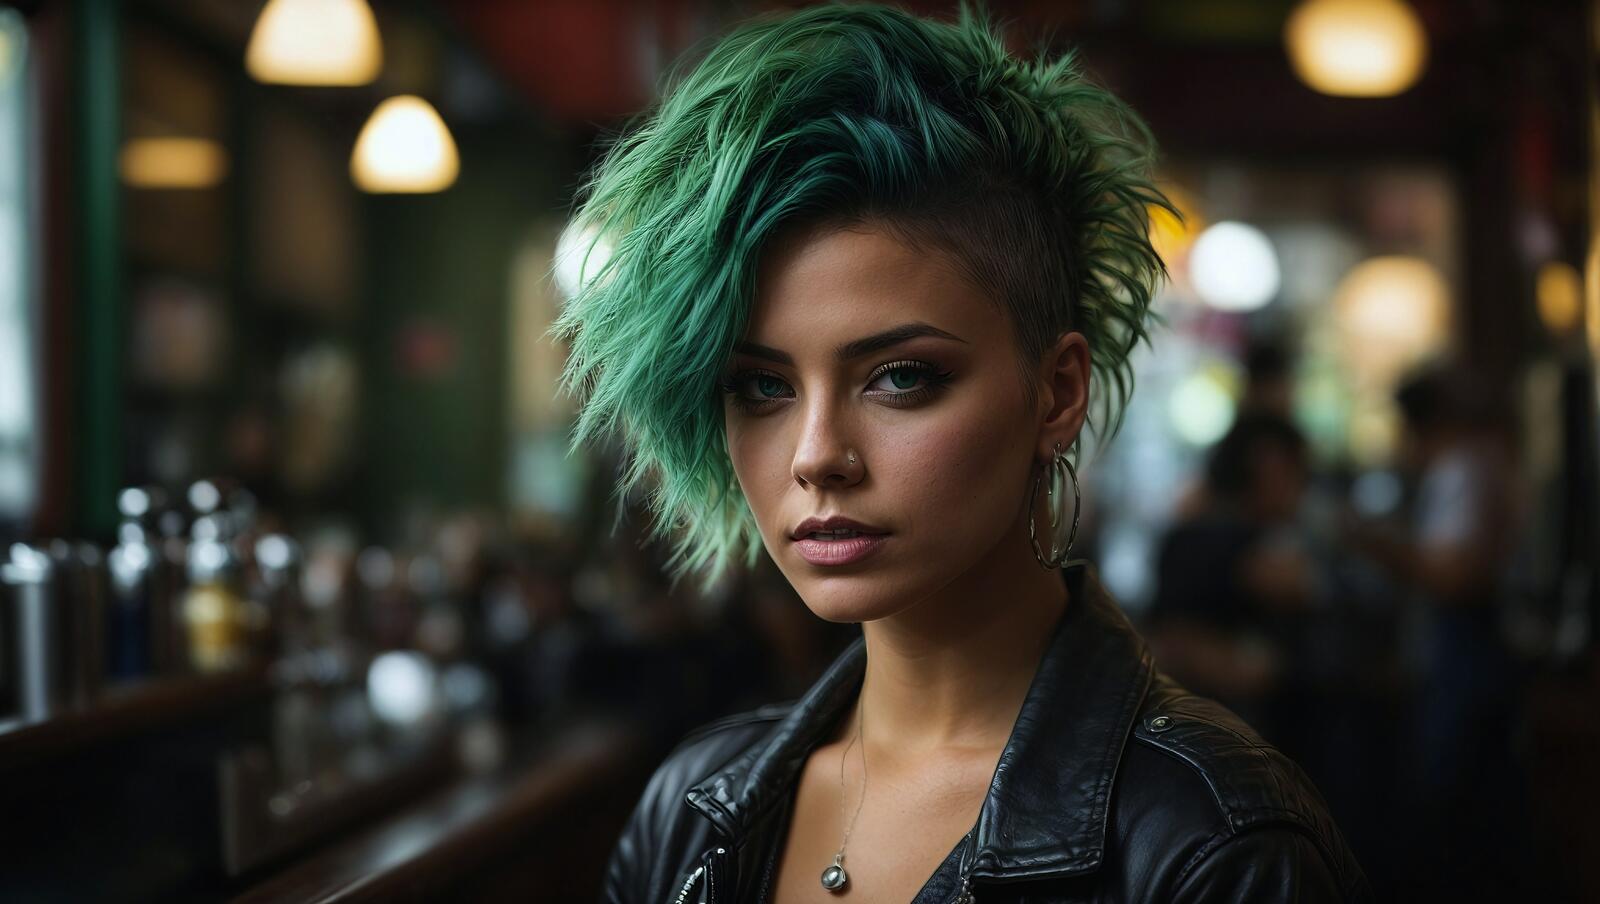 Free photo A woman with dyed green hair in a bar